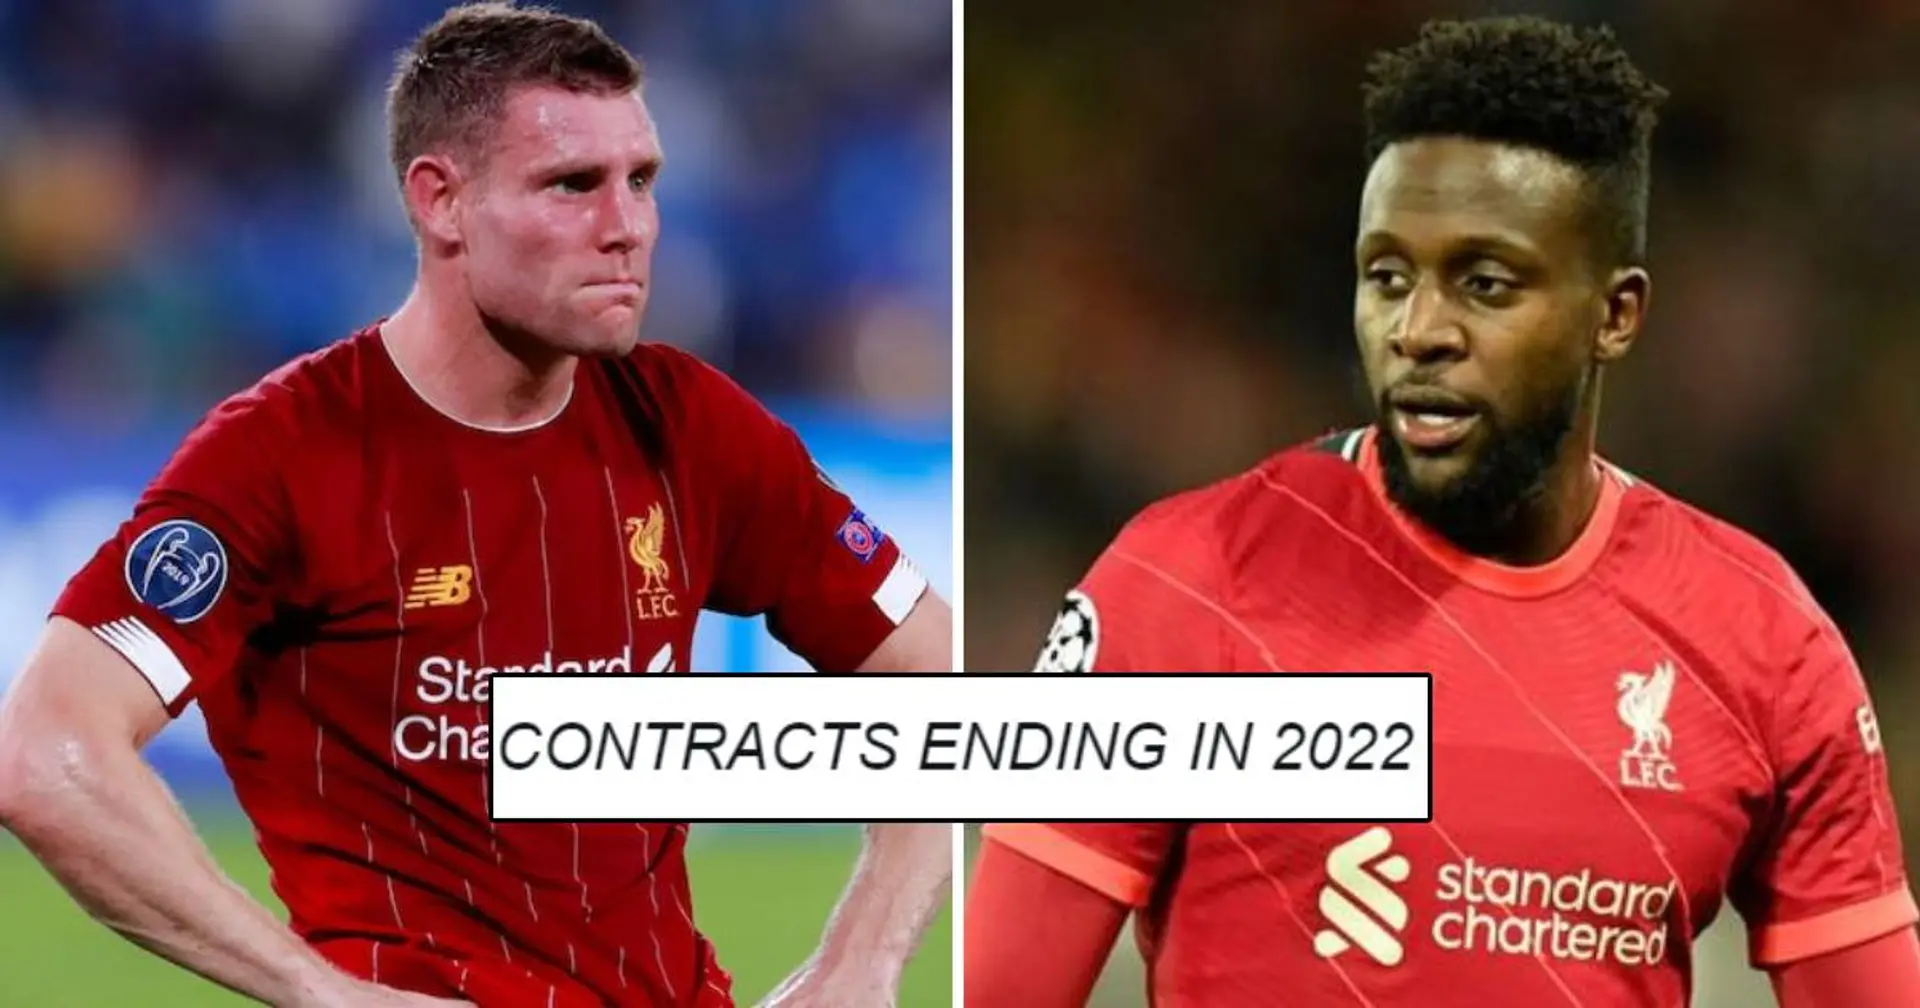 4 players could leave Anfield as free agents this summer: Liverpool contract round-up